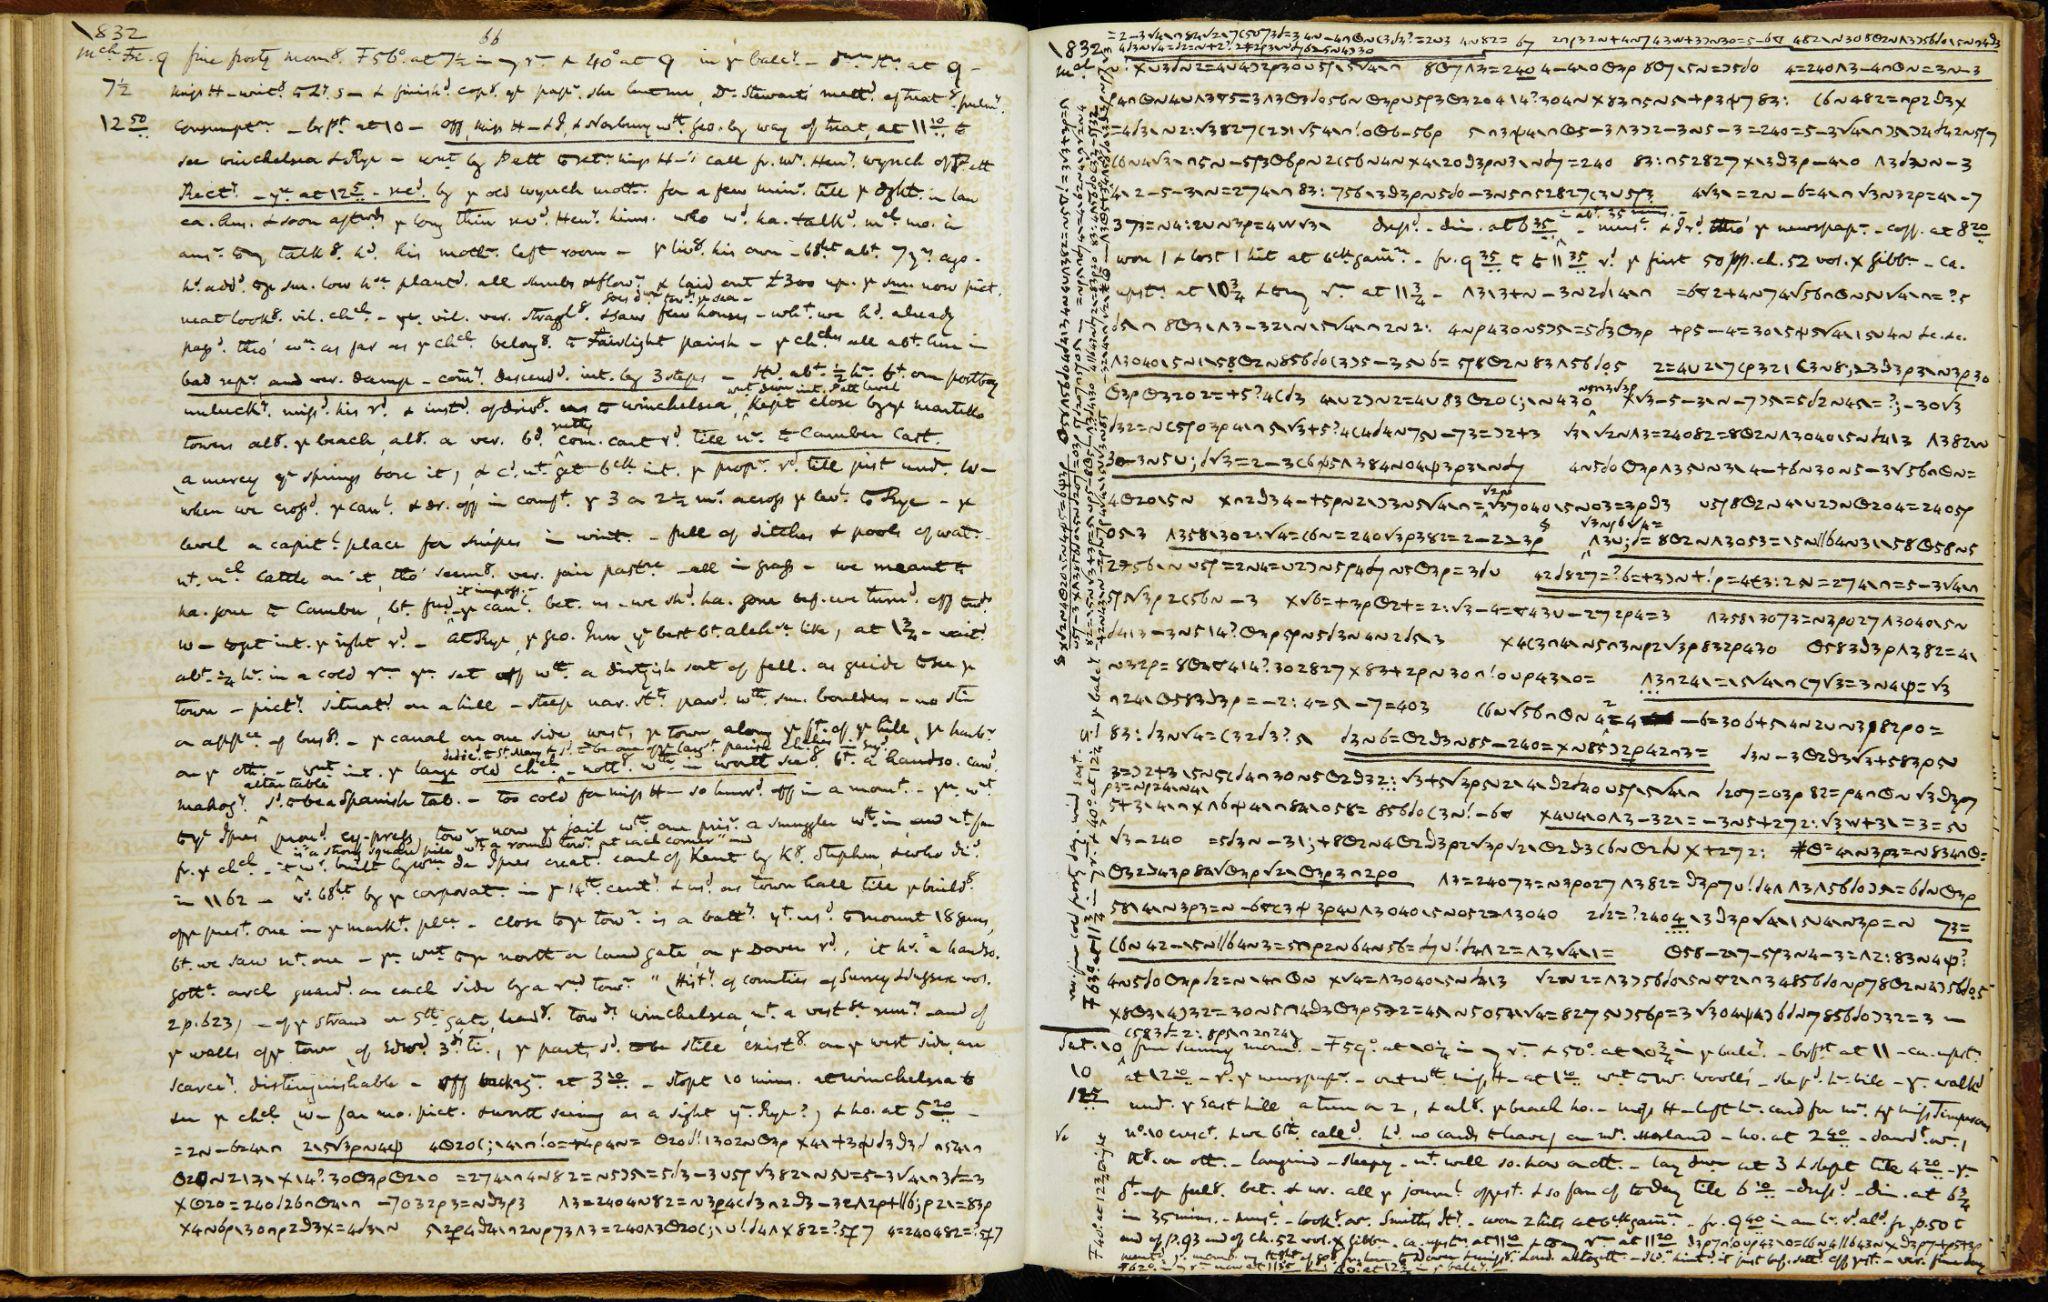 Photograph of two pages from Anne Lister’s Diary from 1832.